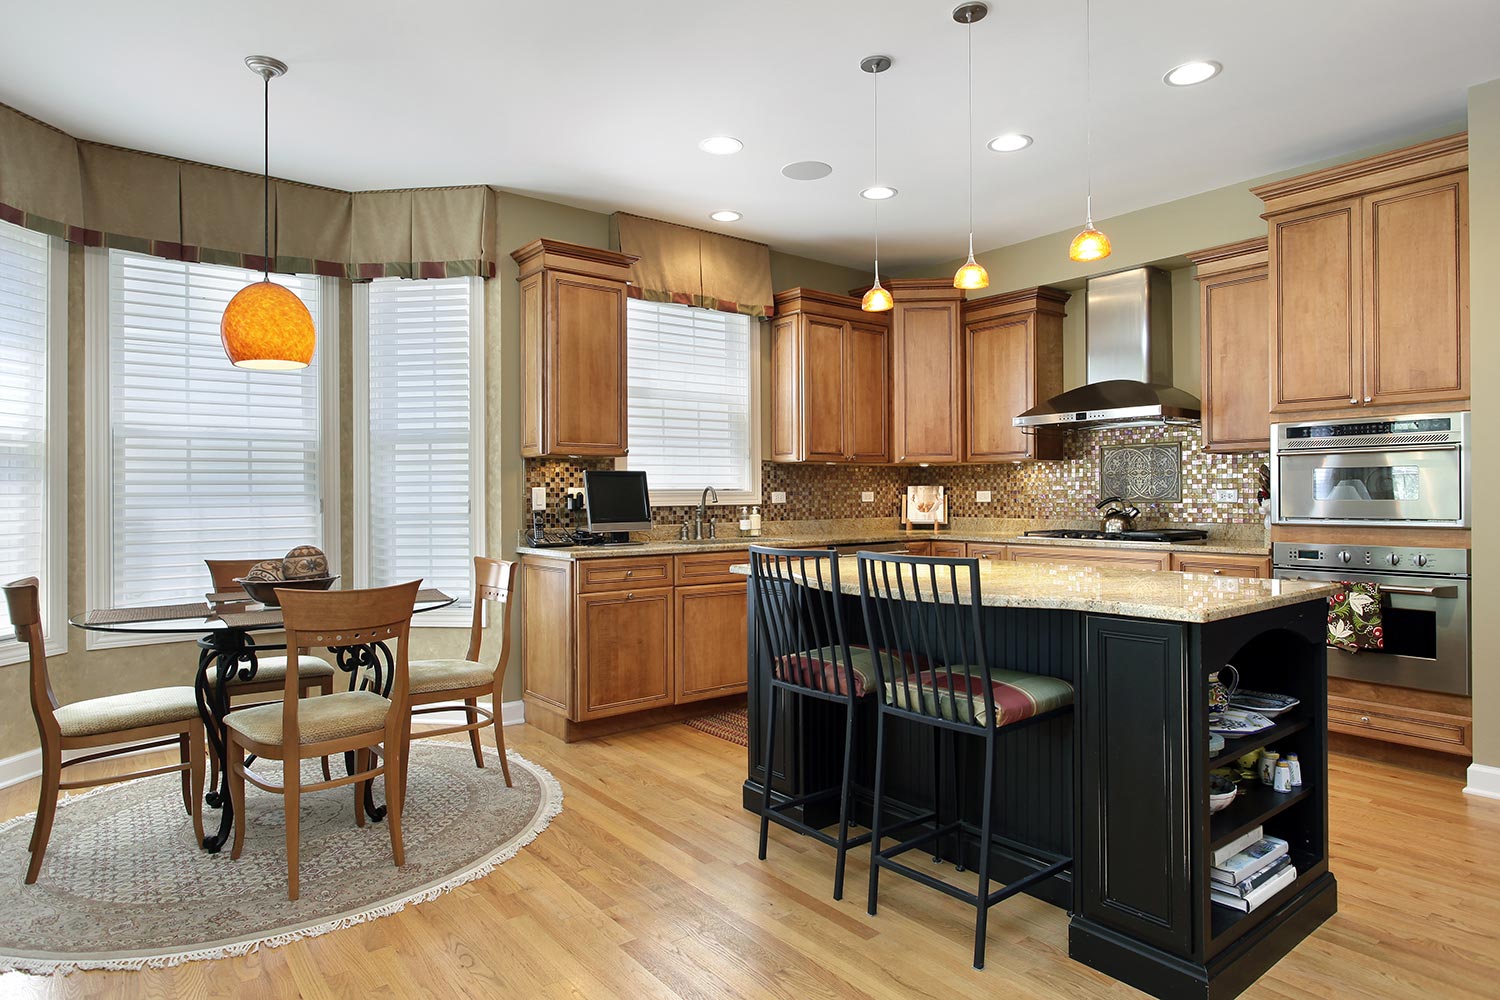 Kitchen with oak wood cabinetry and center island